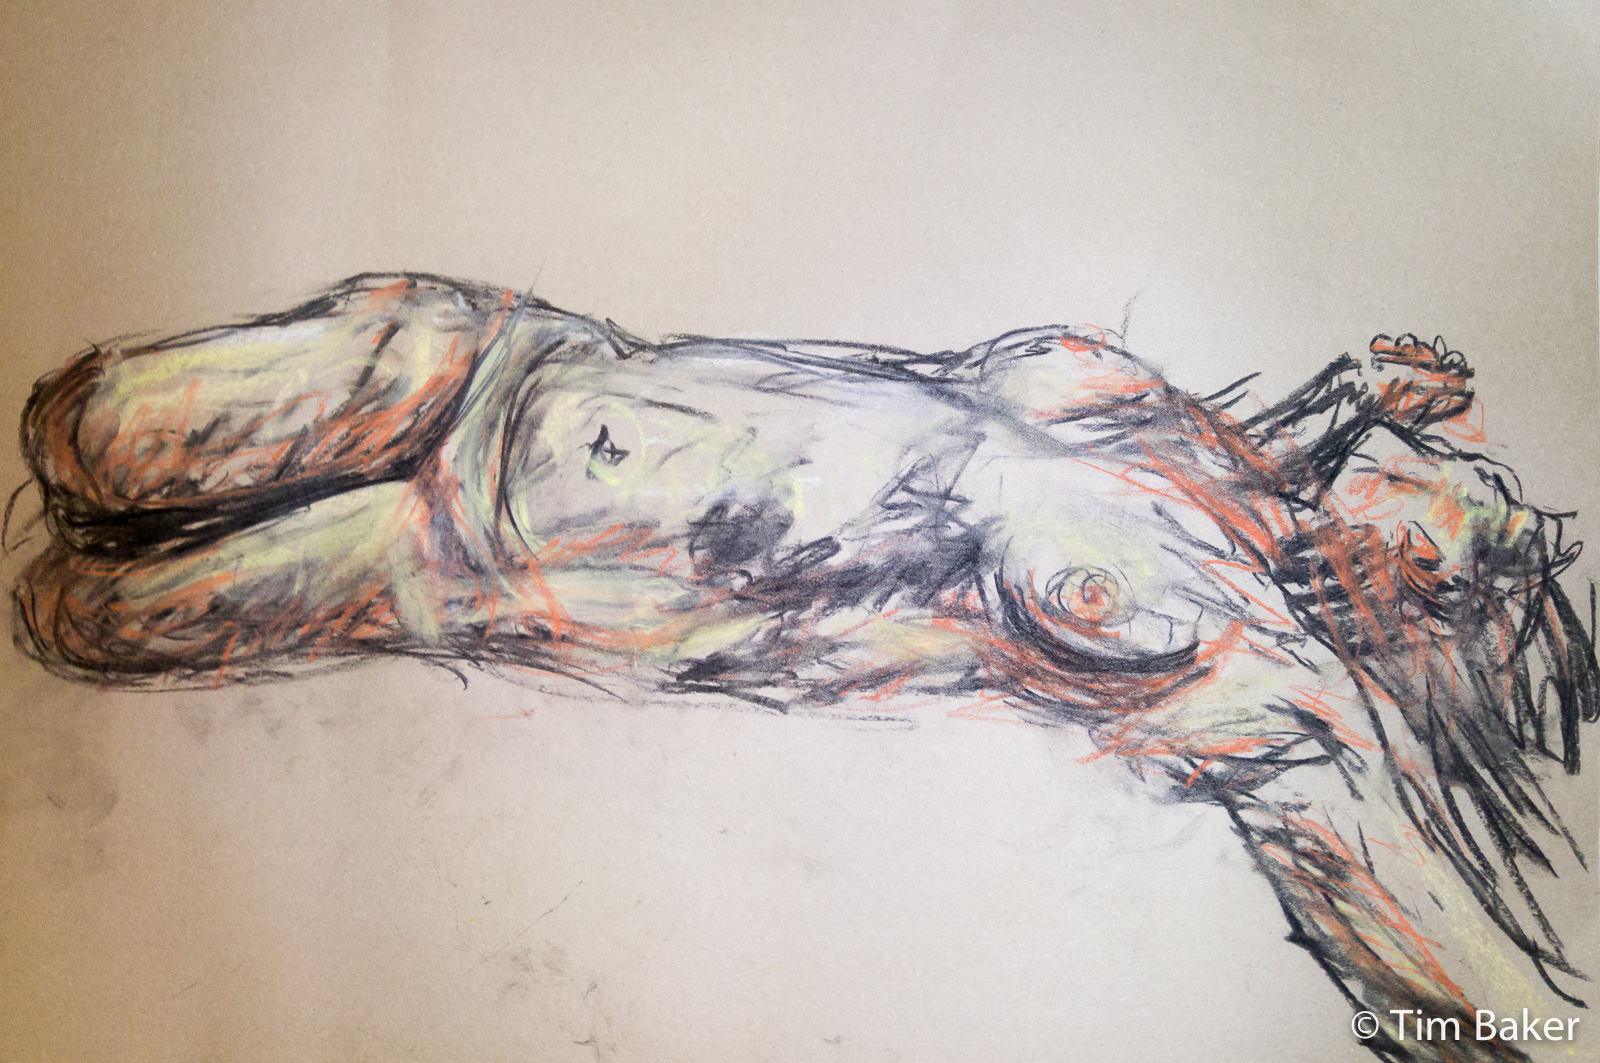 First life drawing in 26 years!